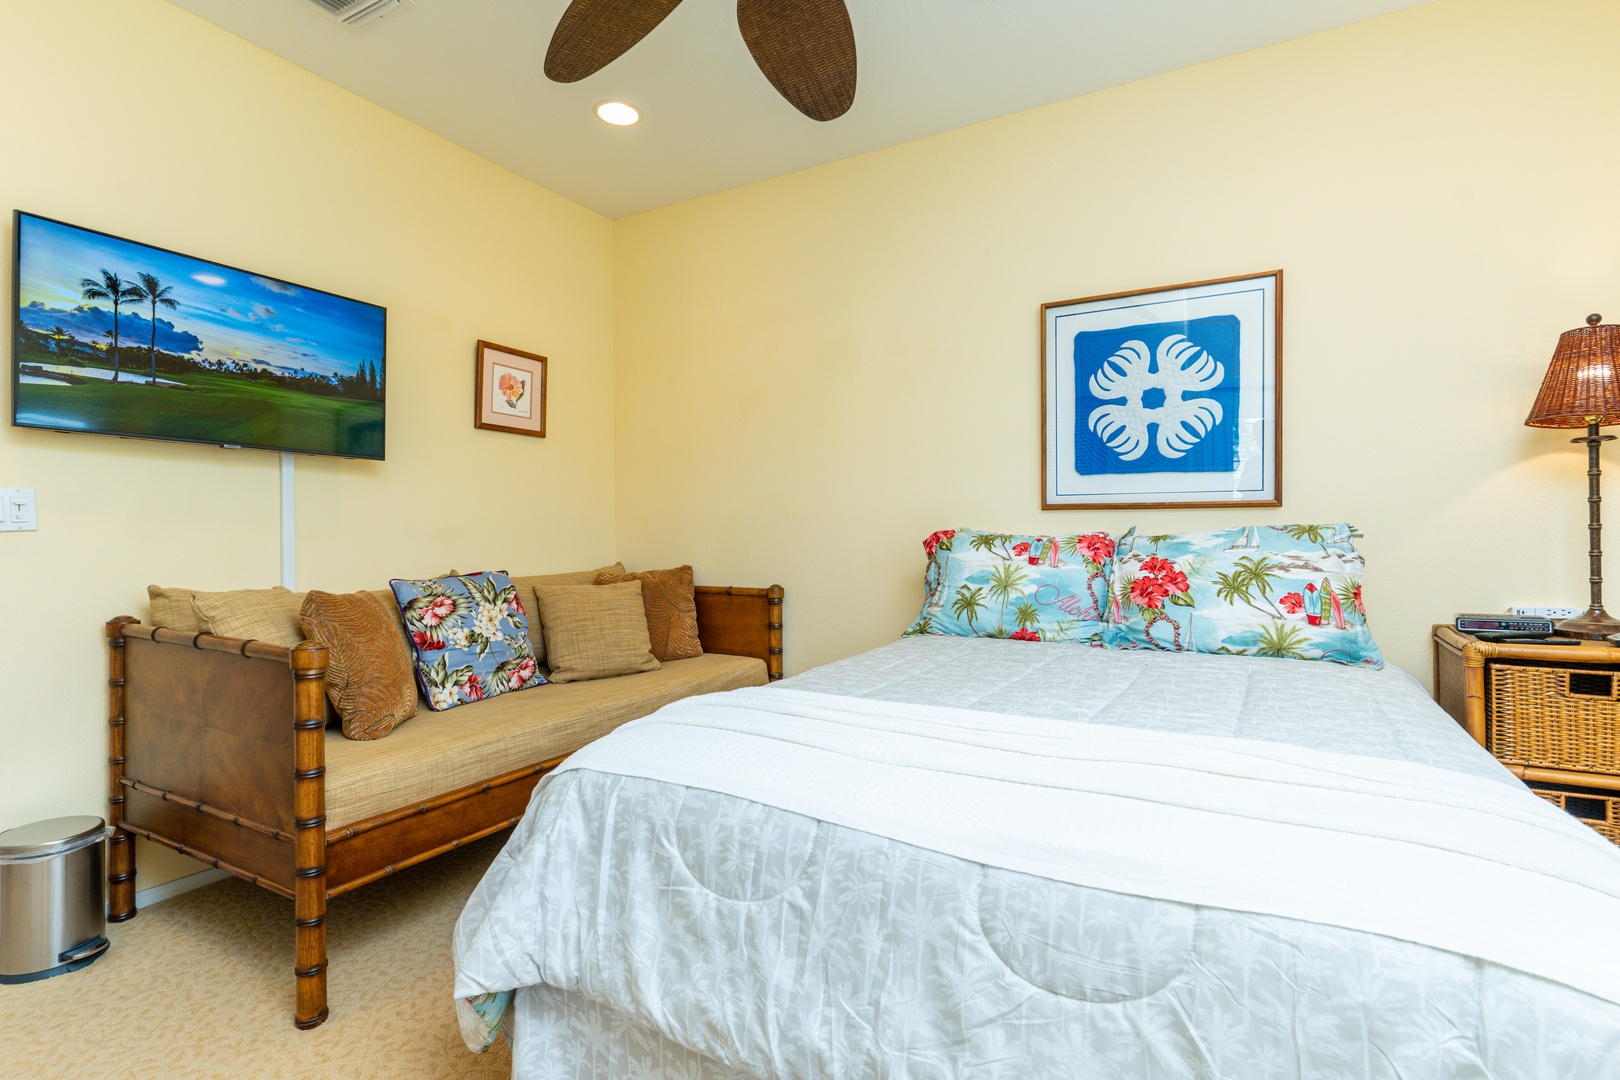 Kapolei Vacation Rentals, Coconut Plantation 1100-2 - The third guest bedroom with generous furnishings and TV.